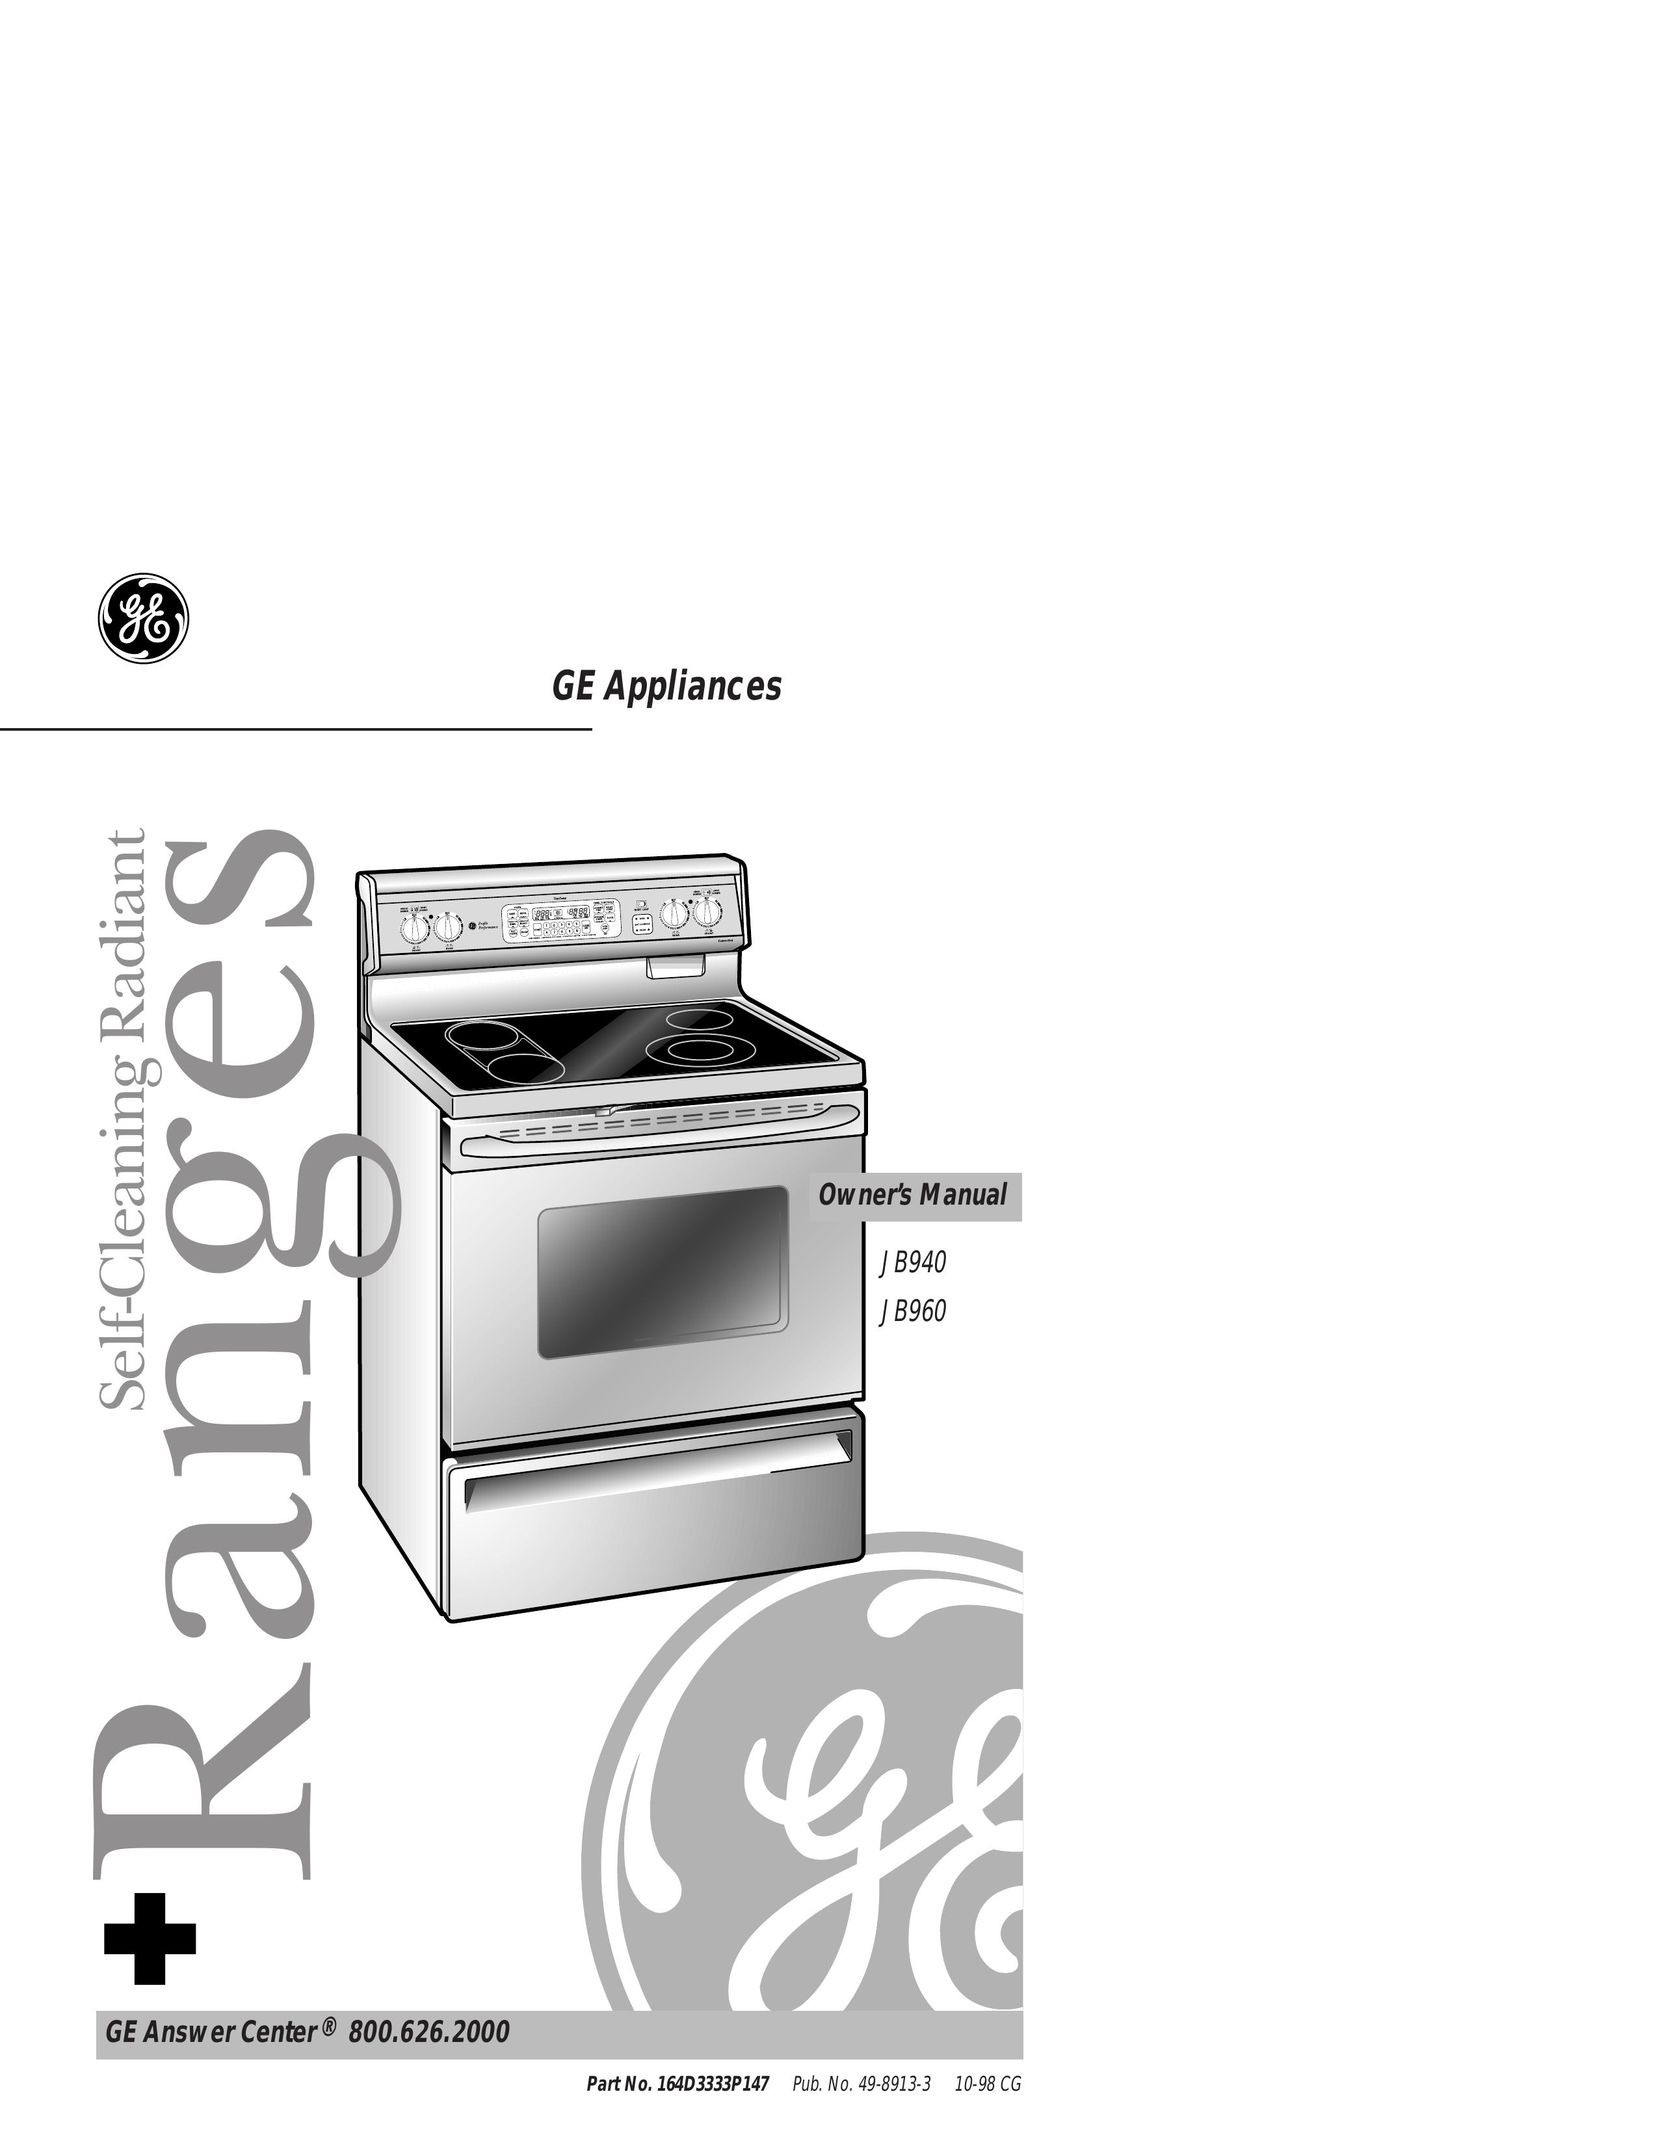 GE JB940 Double Oven User Manual